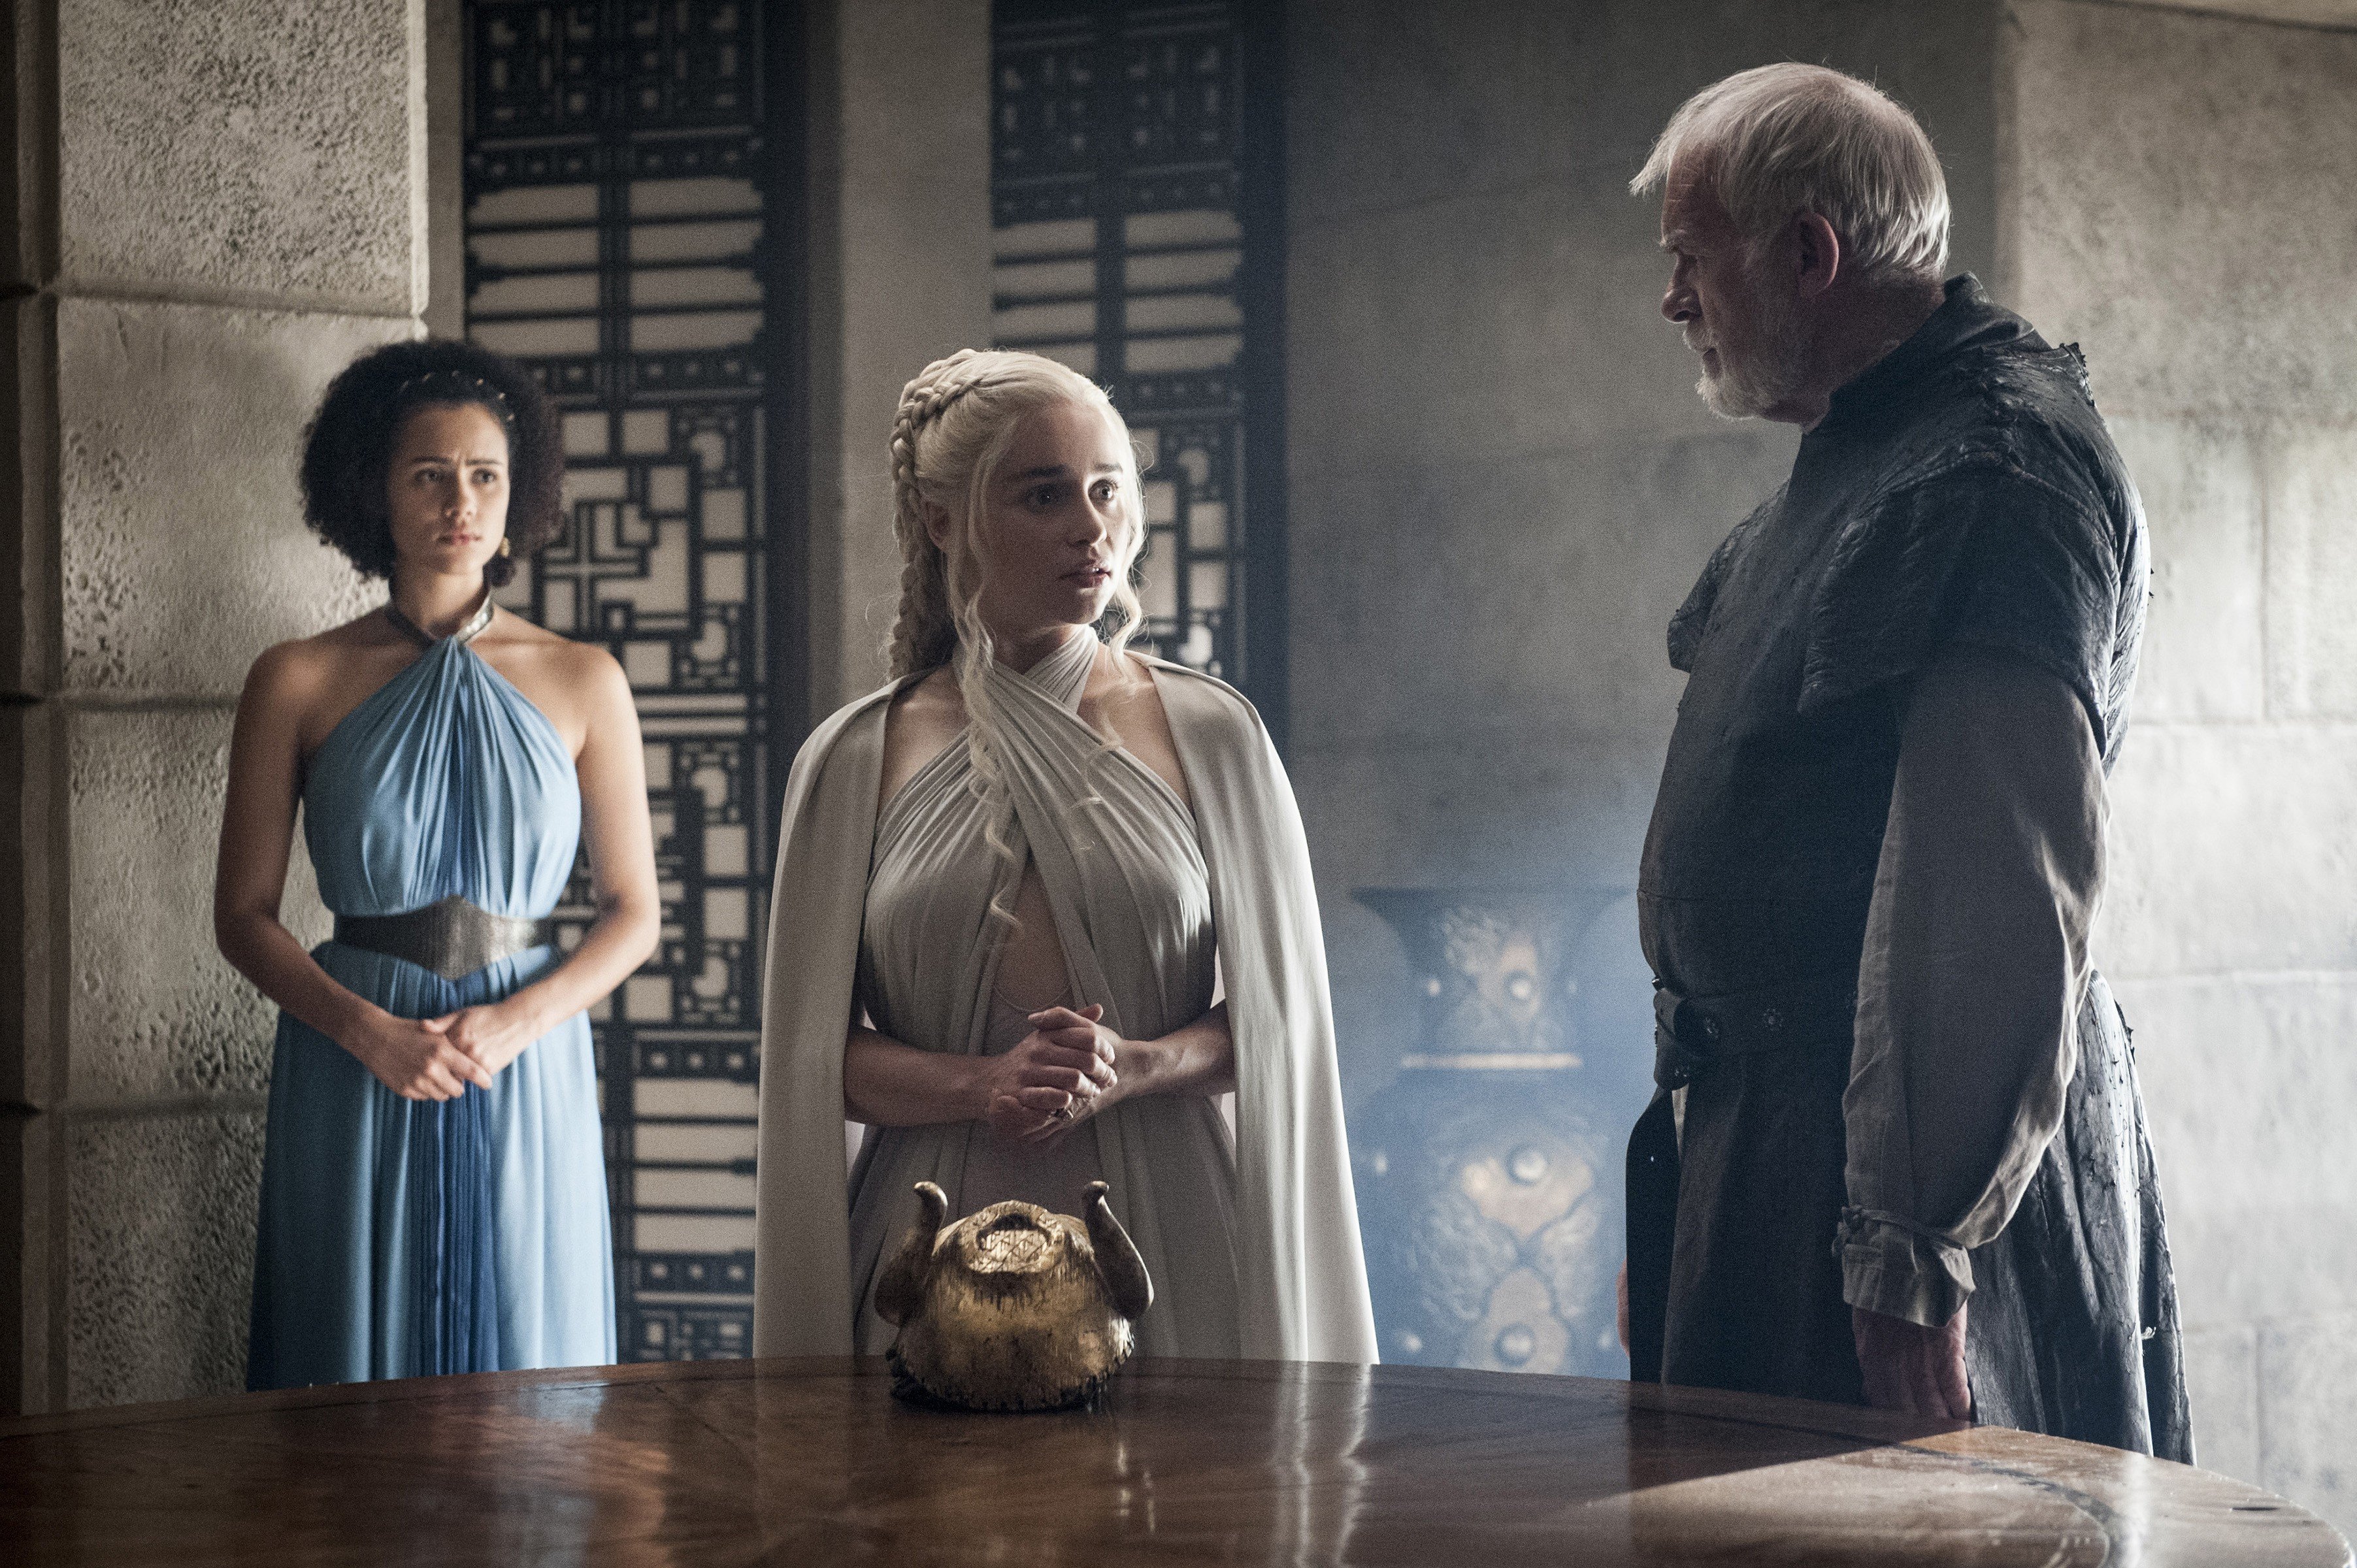 6 Lessons For Entrepreneurs From Game Of Thrones